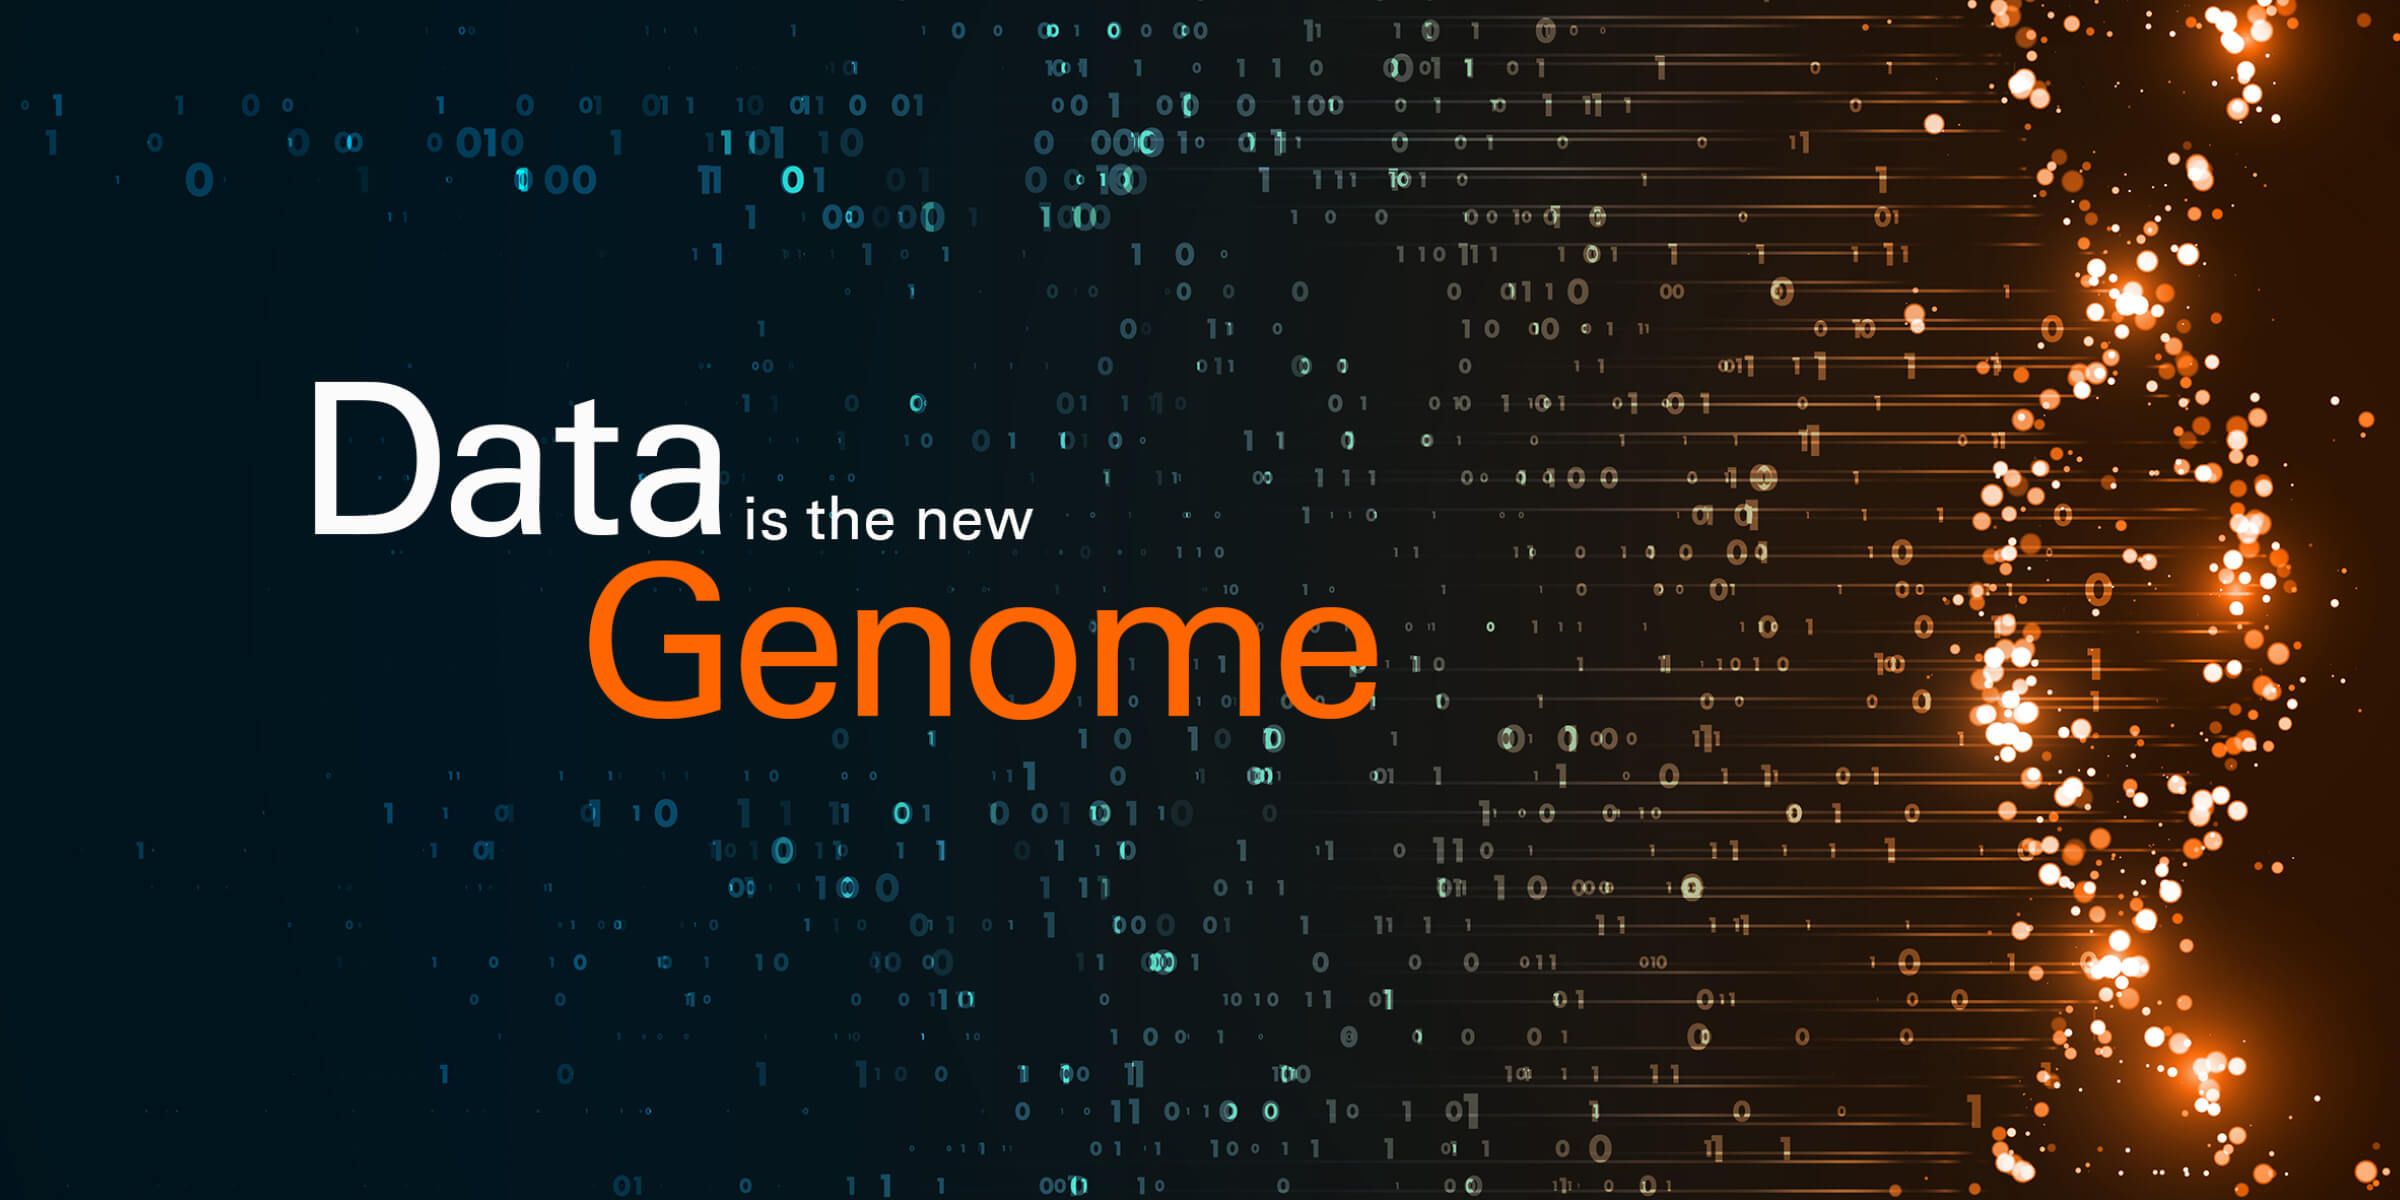 Data is the new genome